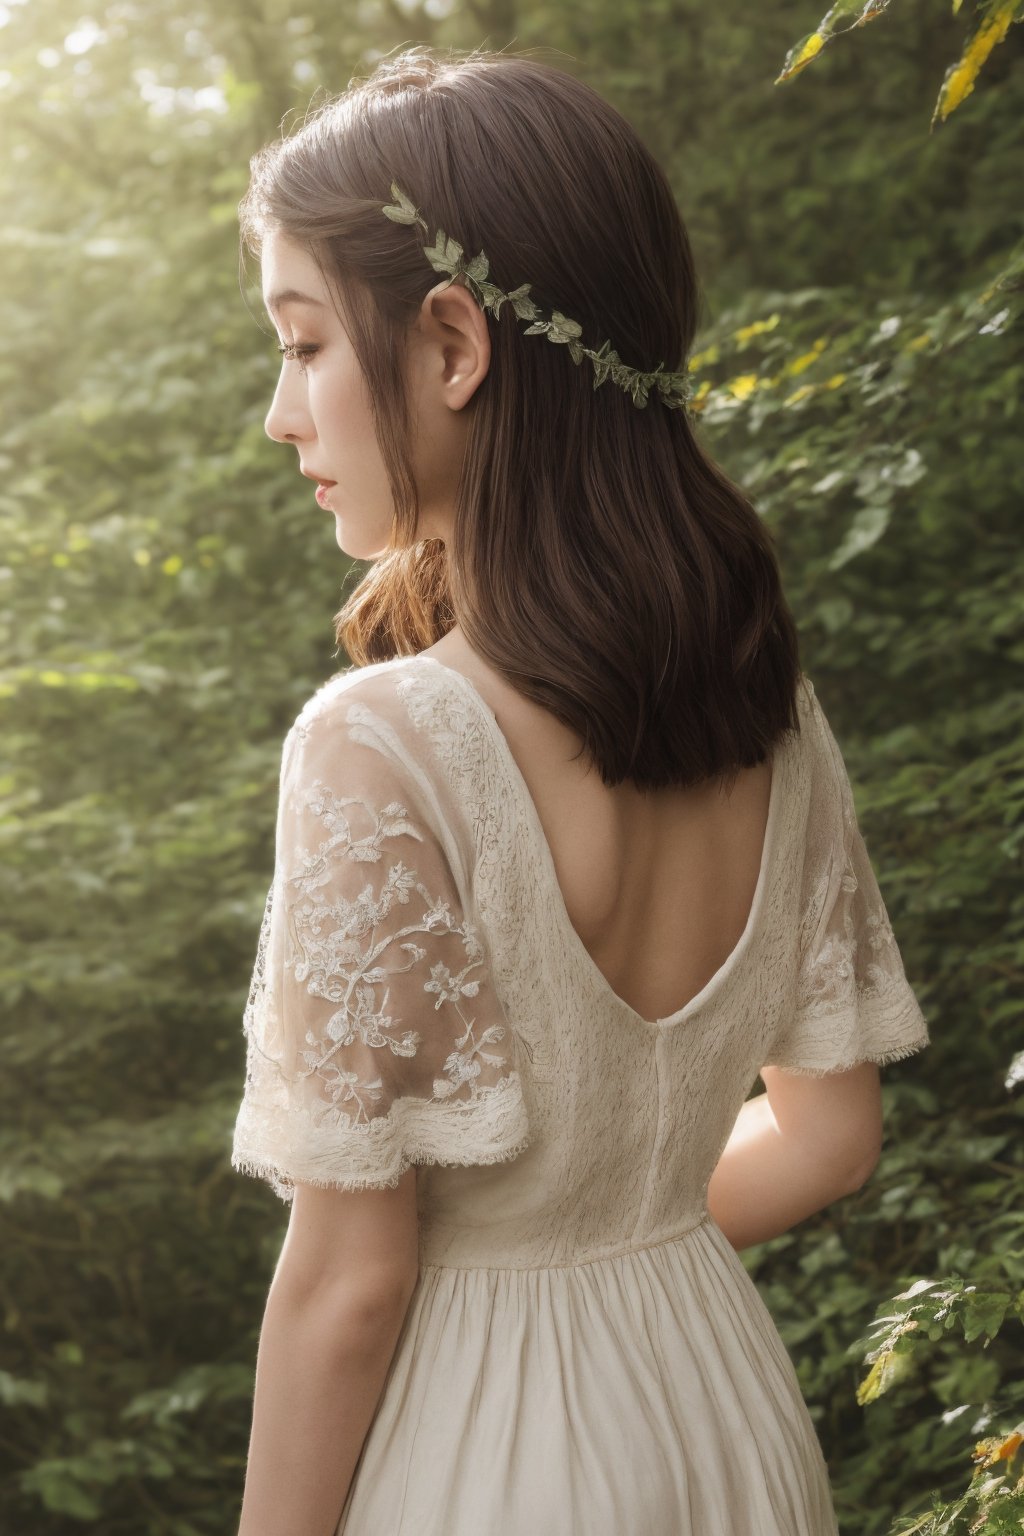 Soft light, HD, realistic skin, photorealism, multiple_views_of_elf_girl, beautiful_embroided_dress
,glowing forest background,rear view, many_angles, sunny_day, viewed_from_side, Enhance